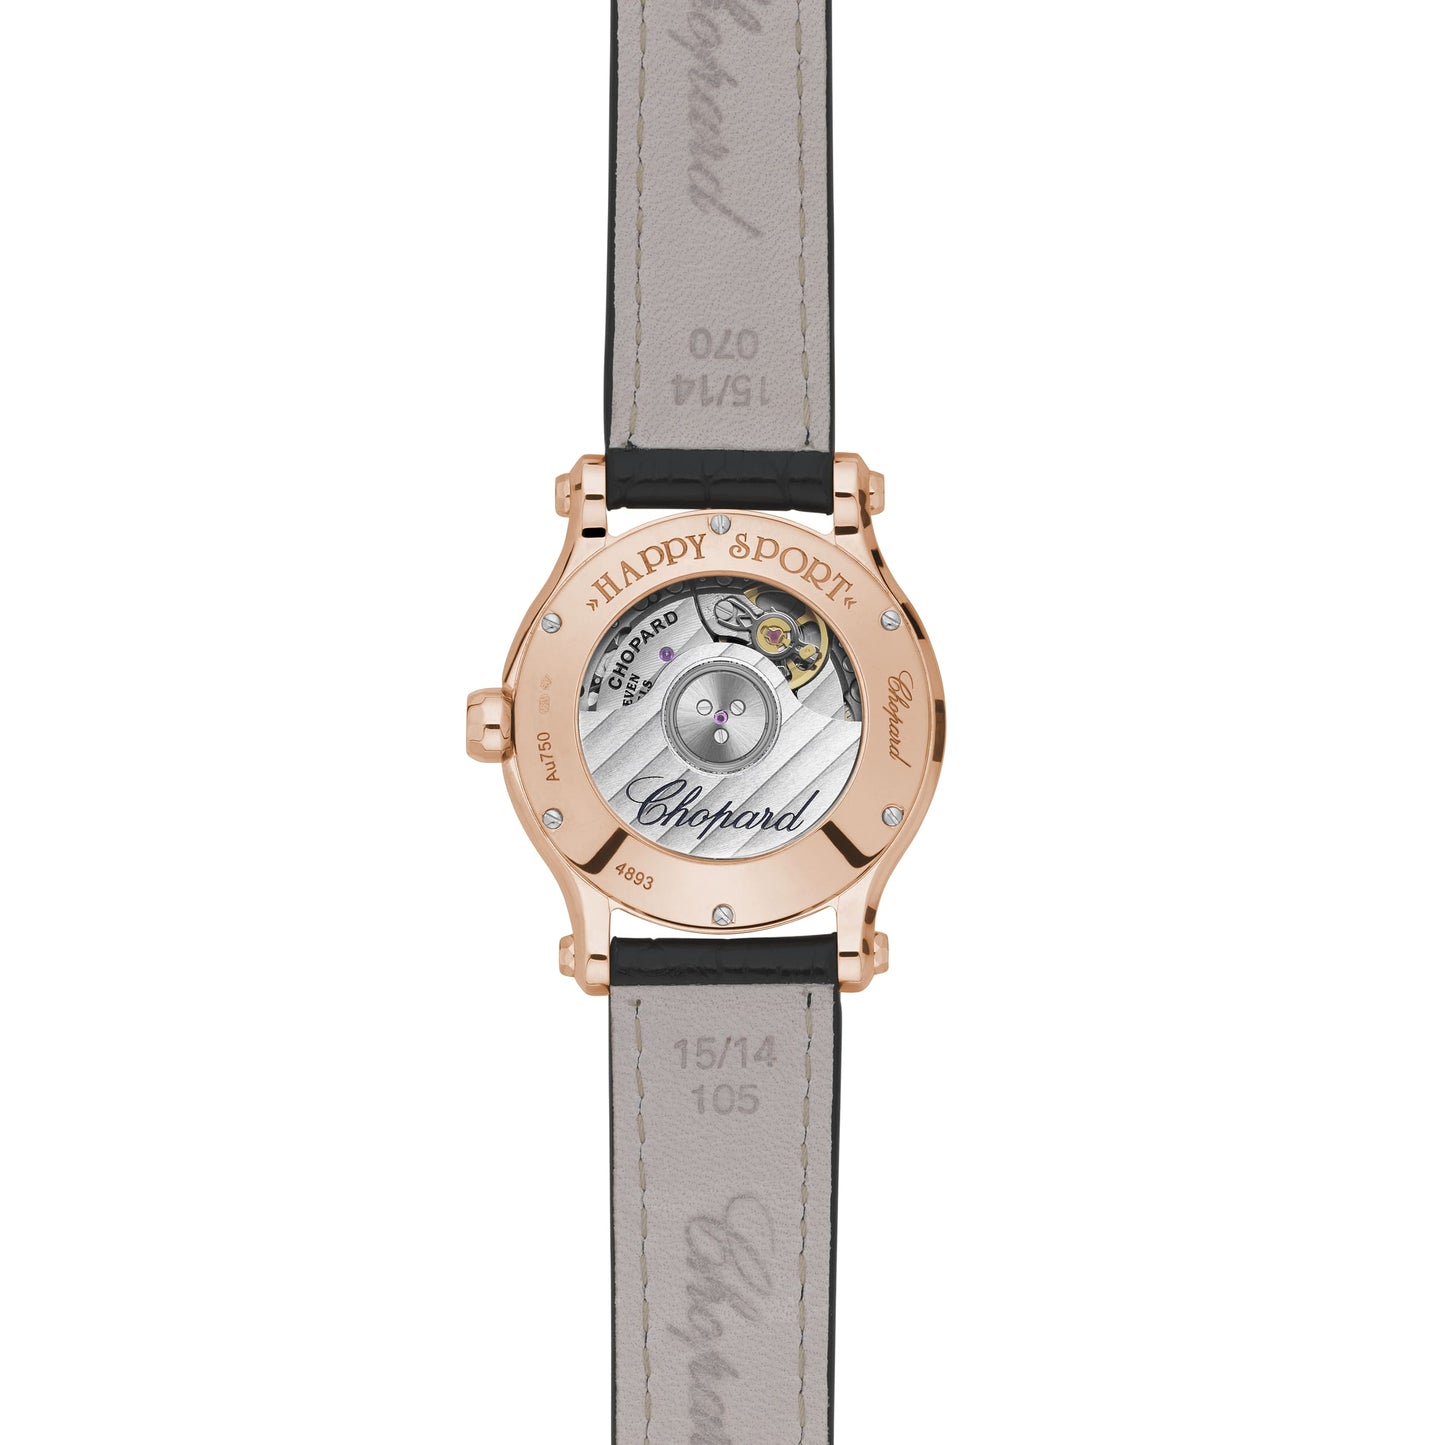 HAPPY SPORT 30 MM, AUTOMATIC, ETHICAL ROSE GOLD, DIAMONDS 274893-5011